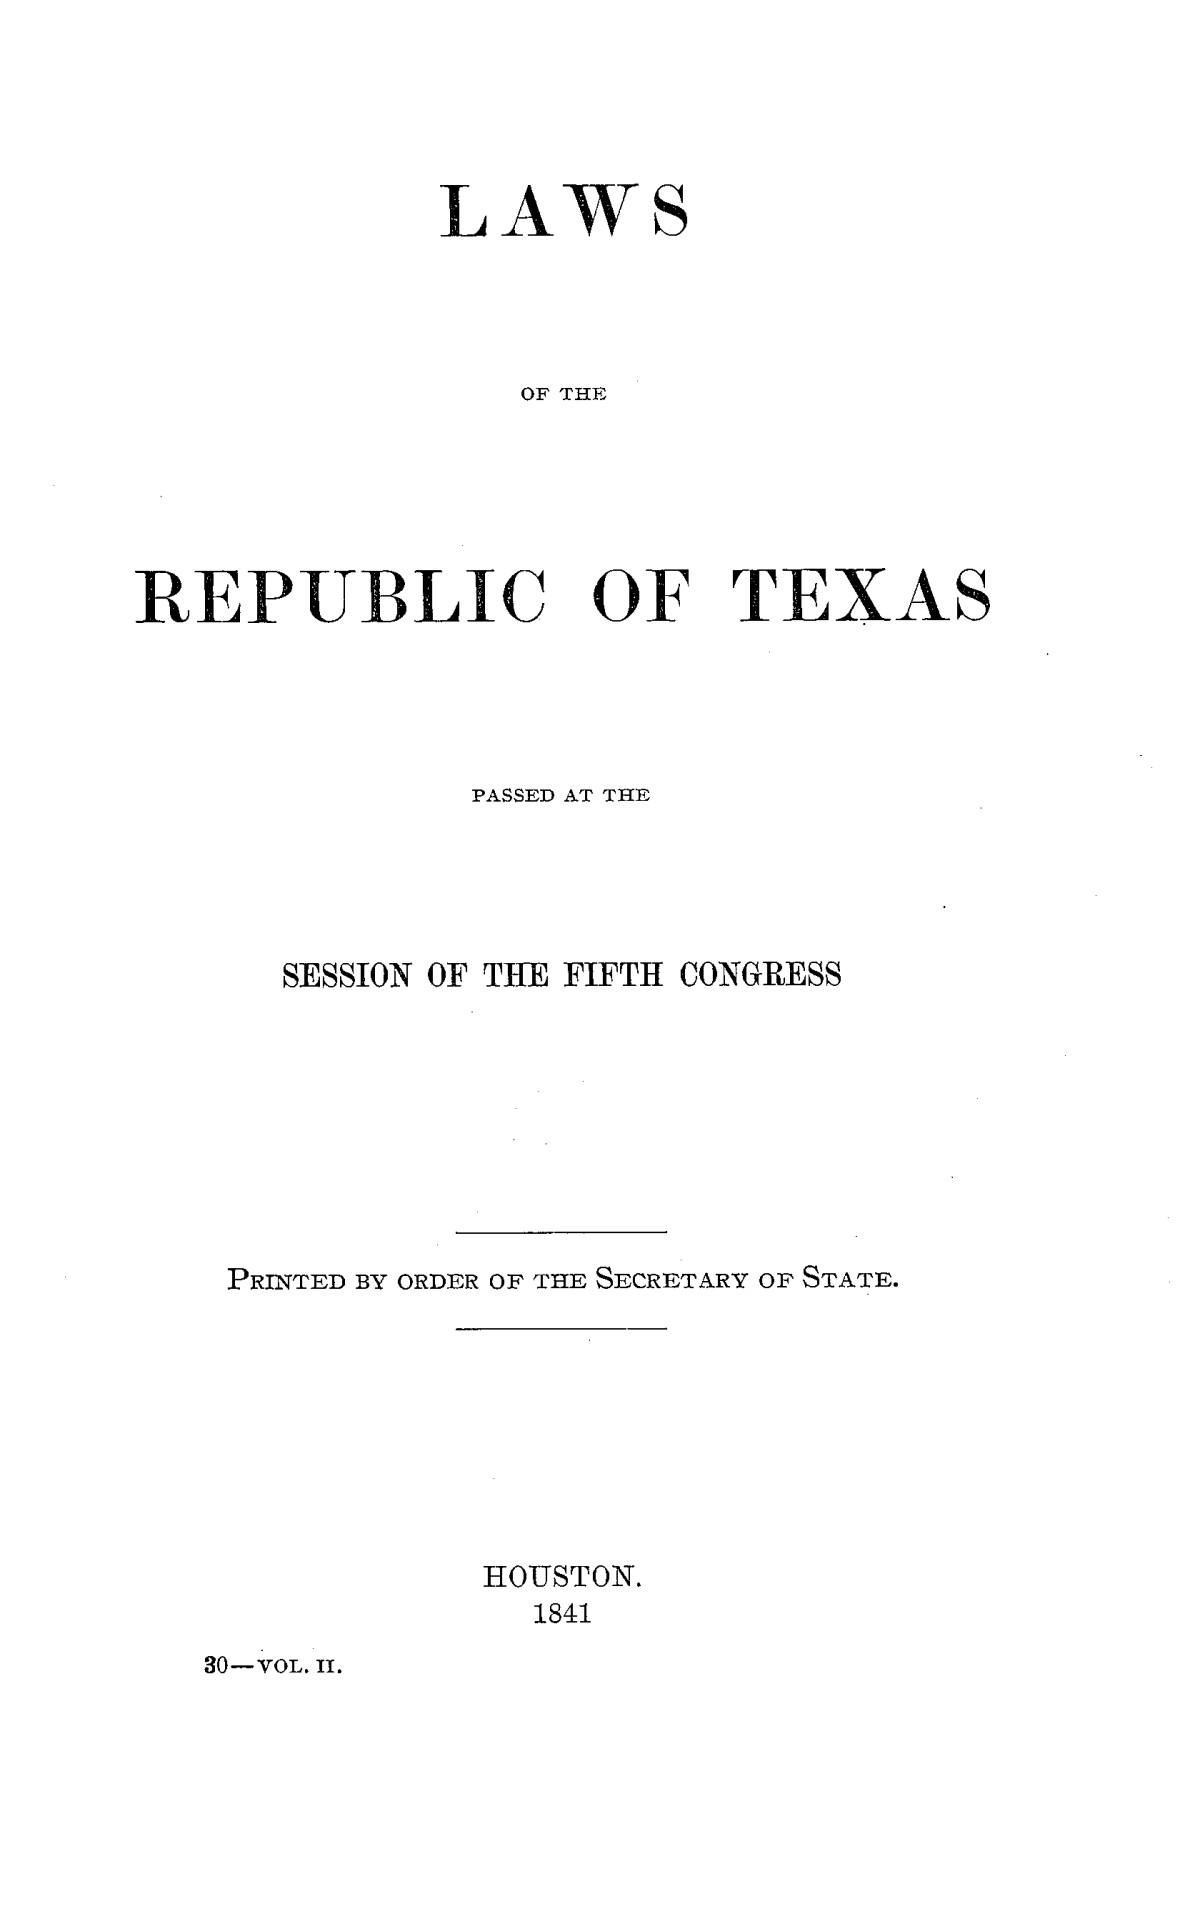 The Laws of Texas, 1822-1897 Volume 2
                                                
                                                    465
                                                